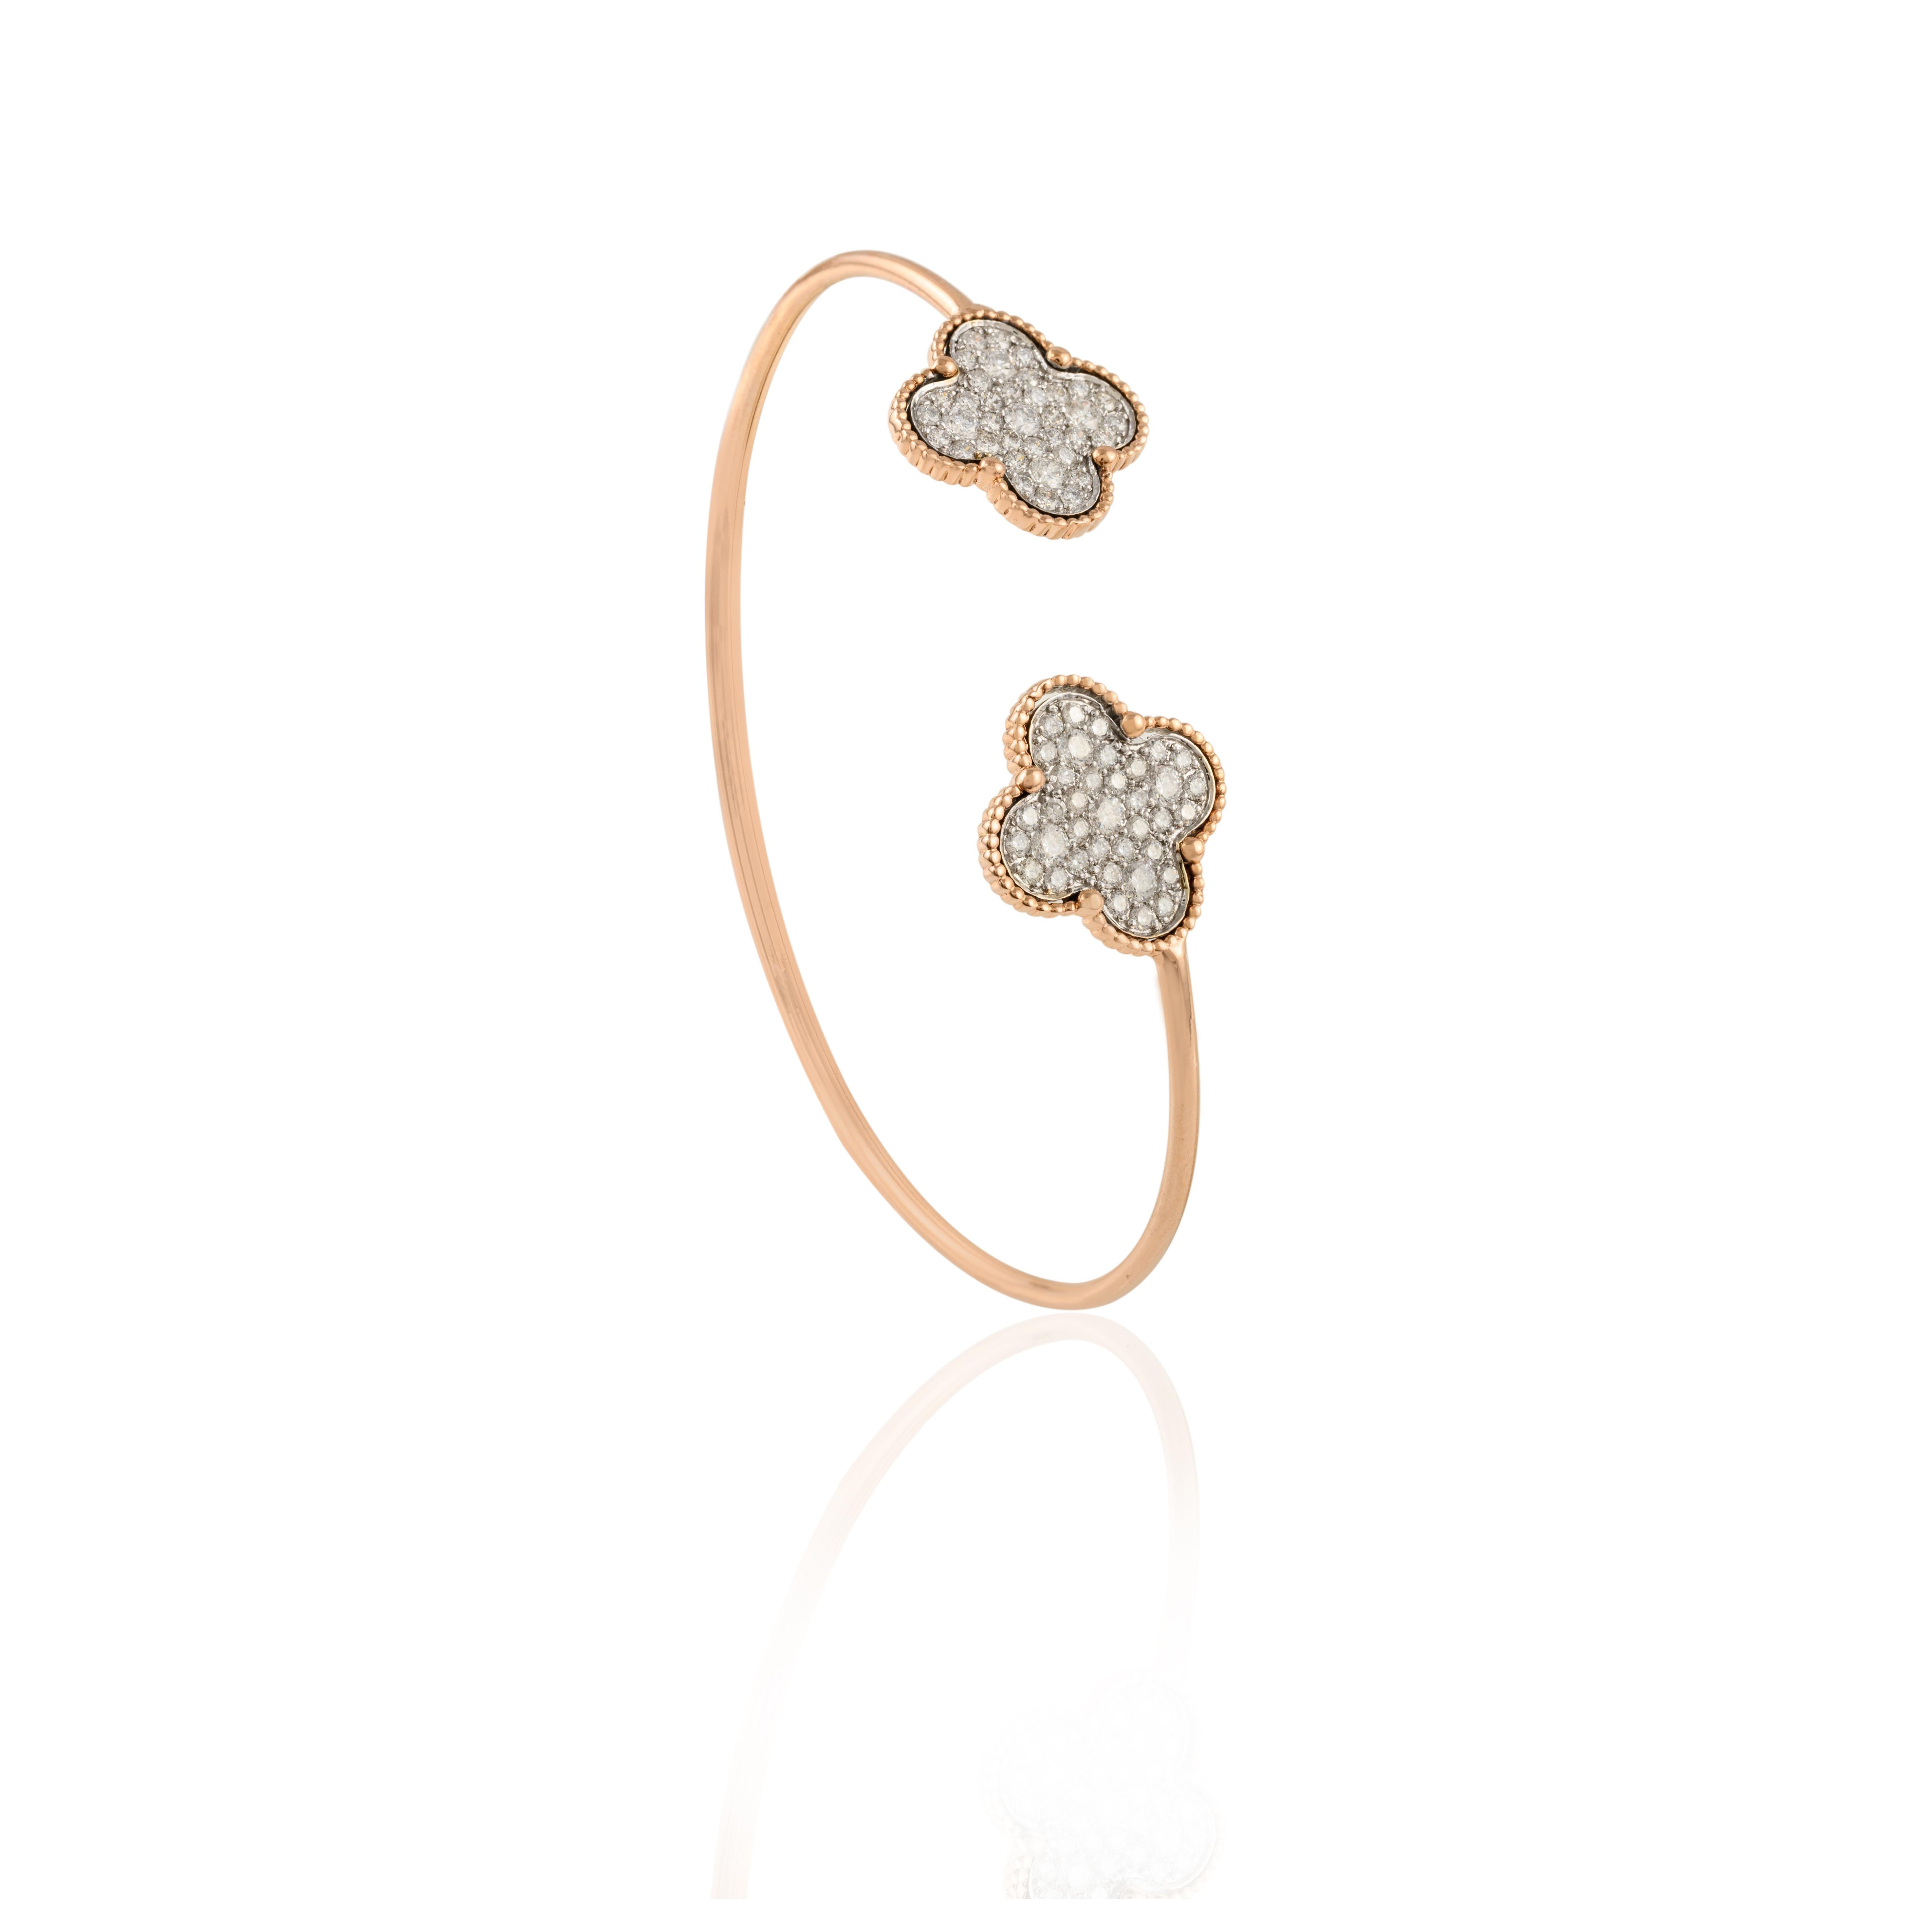 This Clover Diamond Cuff Bracelet in 18K gold showcases sparkling natural diamonds, weighing 1.15 carats. 
April birthstone diamond brings love, fame, success and prosperity.
Designed with diamond studded in two clovers making a charm set on